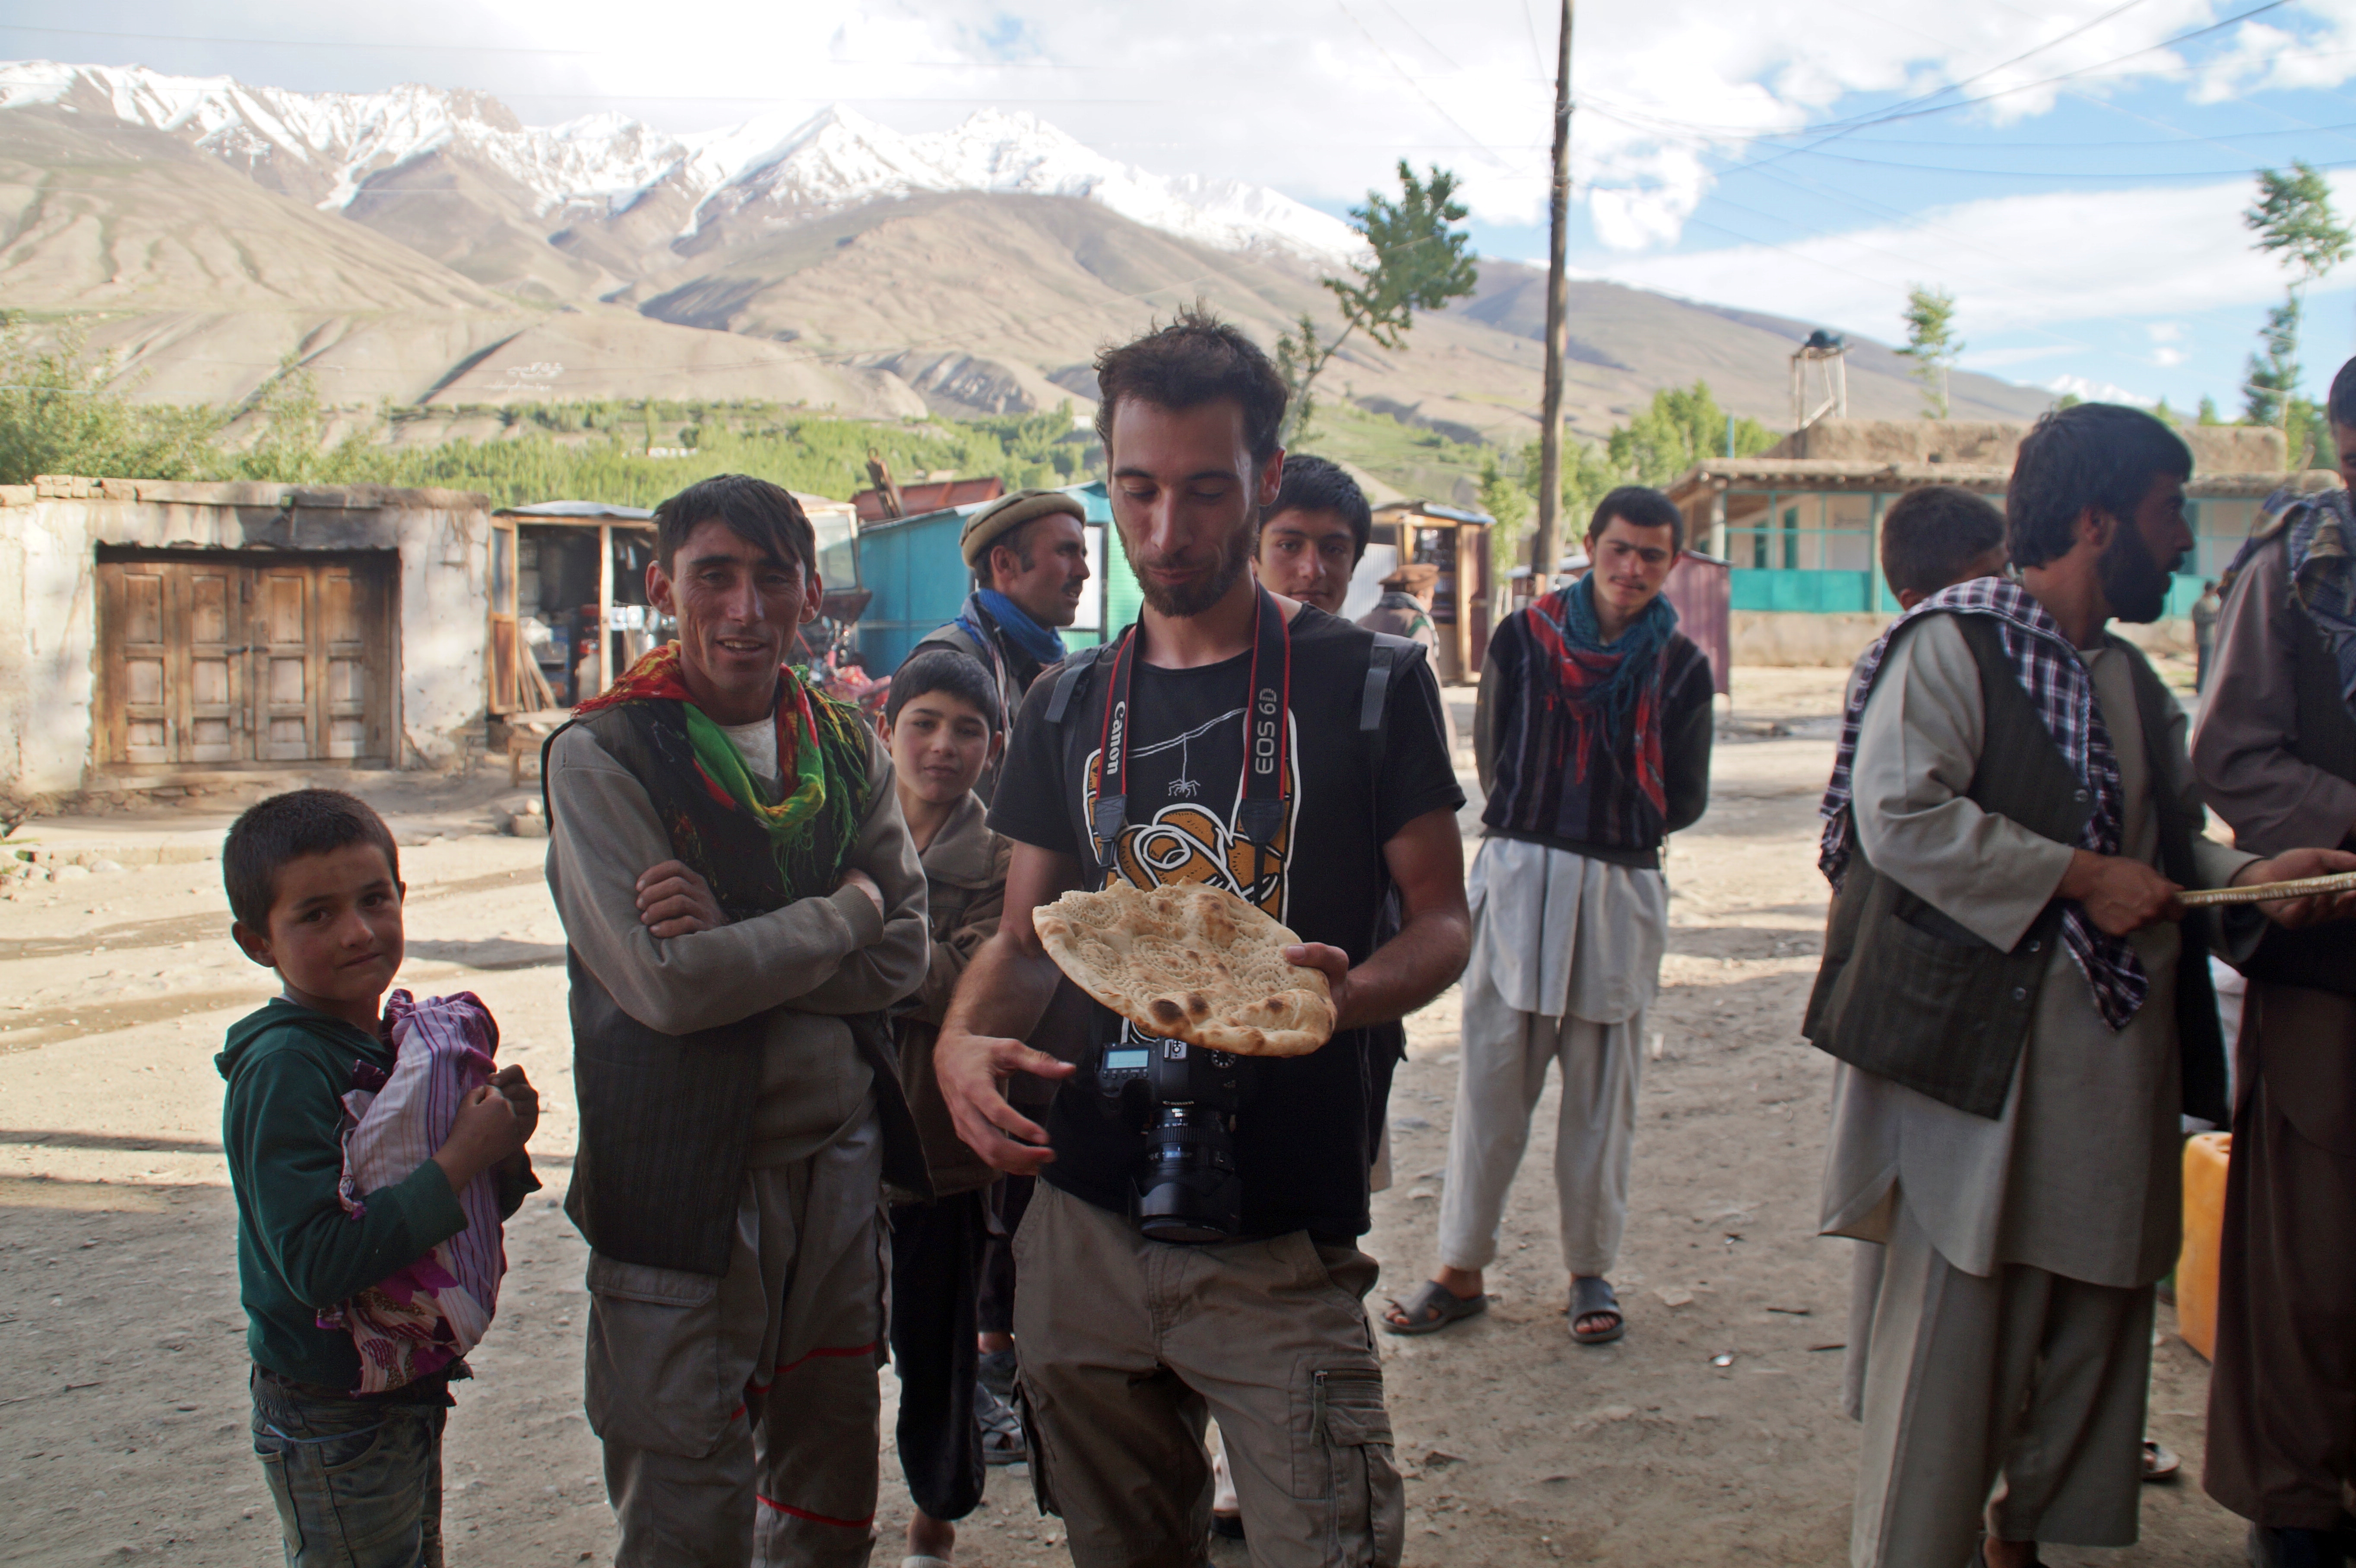 Steve was the center of attention while eating his traditional Afghan flatbread in Sultan Eshkashim